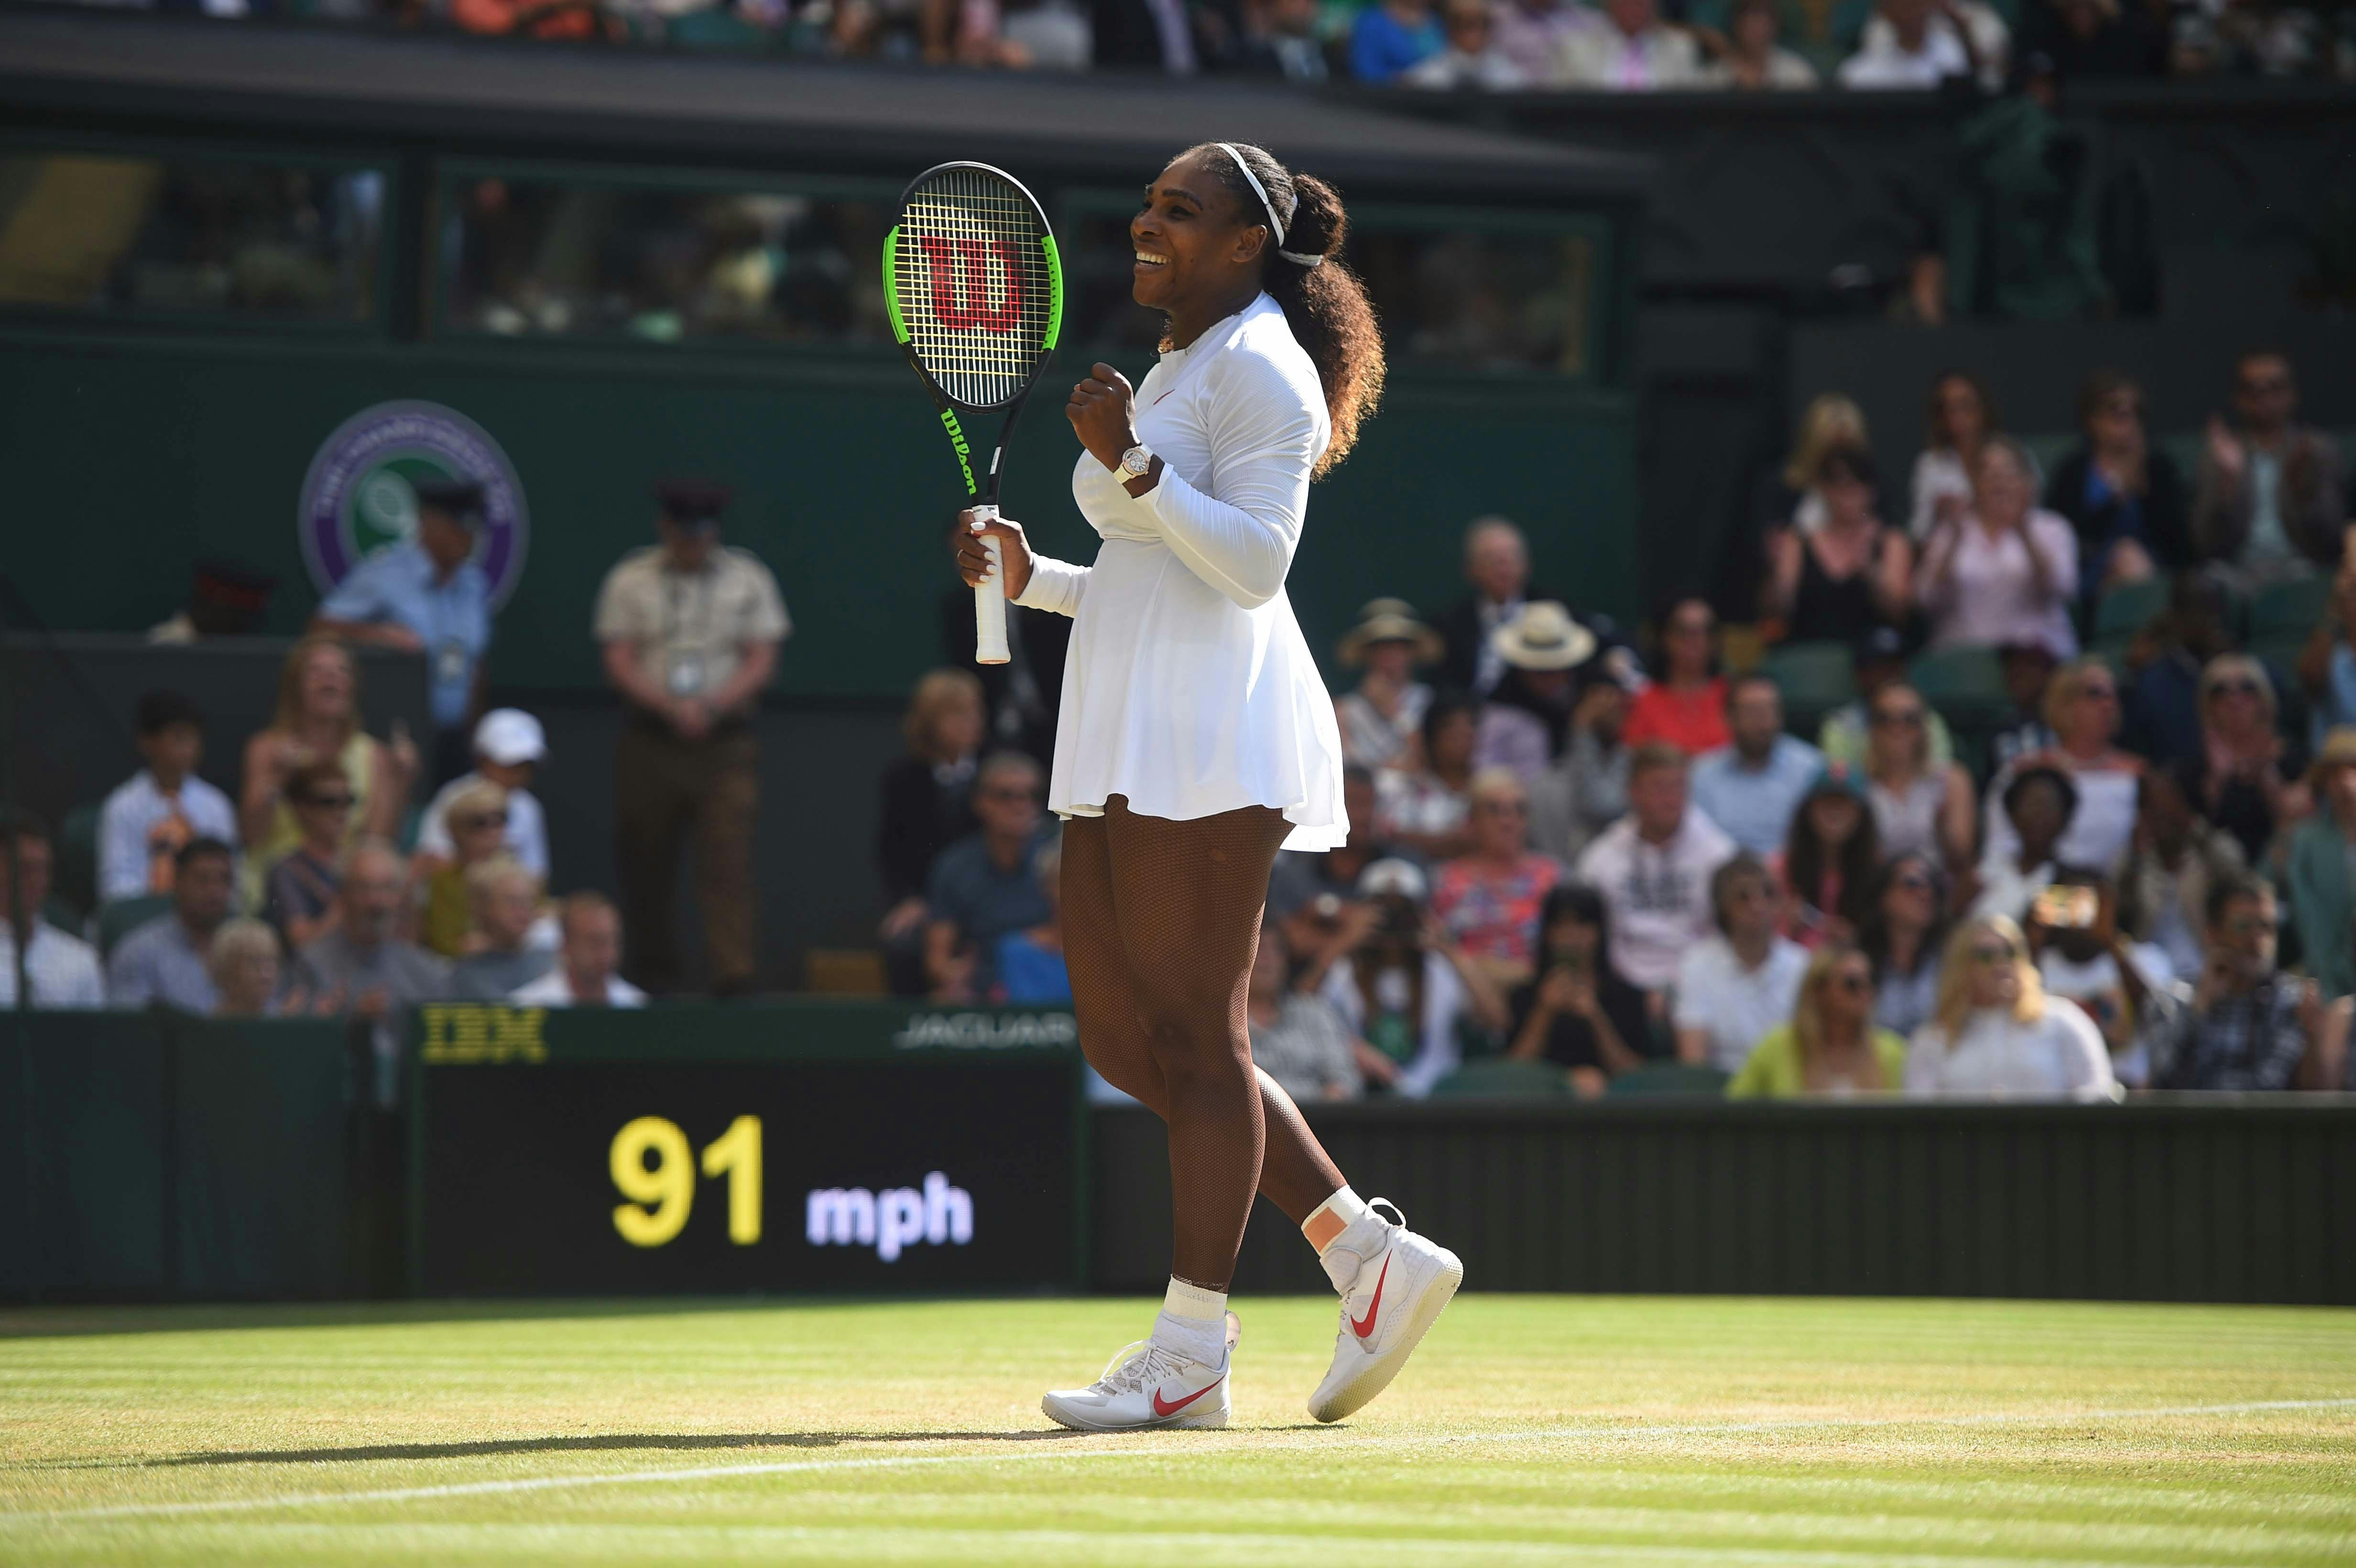 Serena Wiliams smiles after qualifying for Wimbledon 2018 semis.